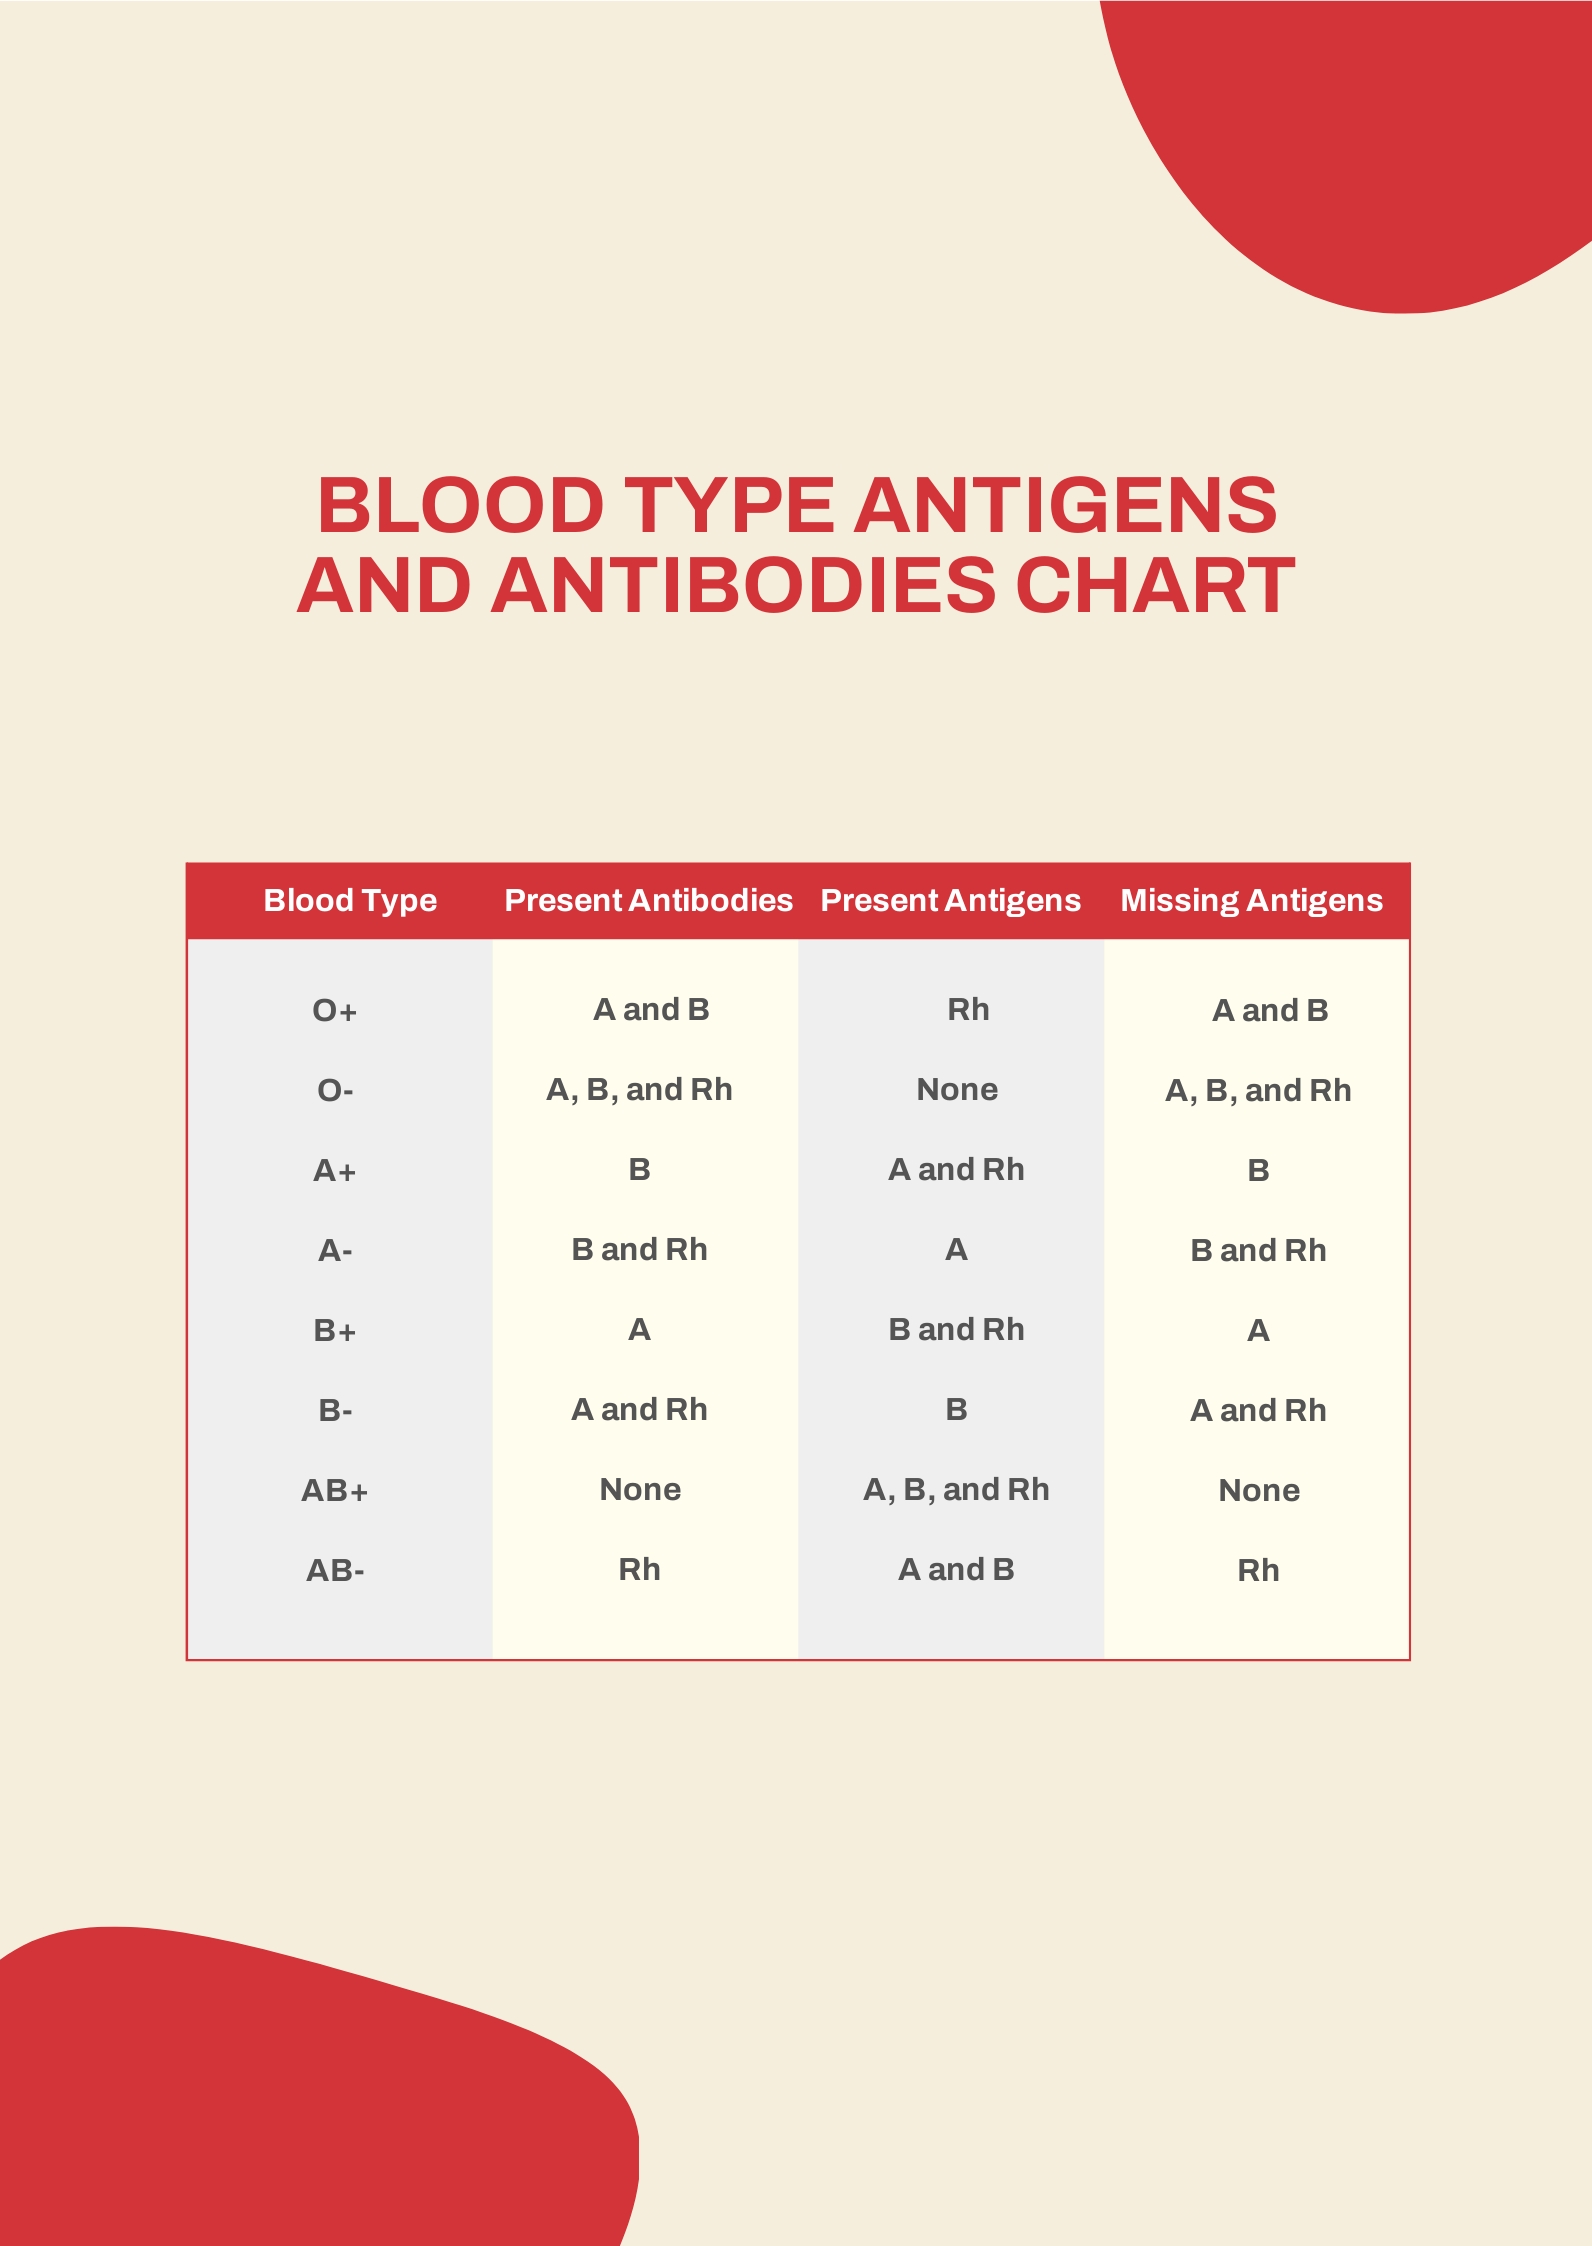 blood-type-chart-with-rh-factor-pdf-template